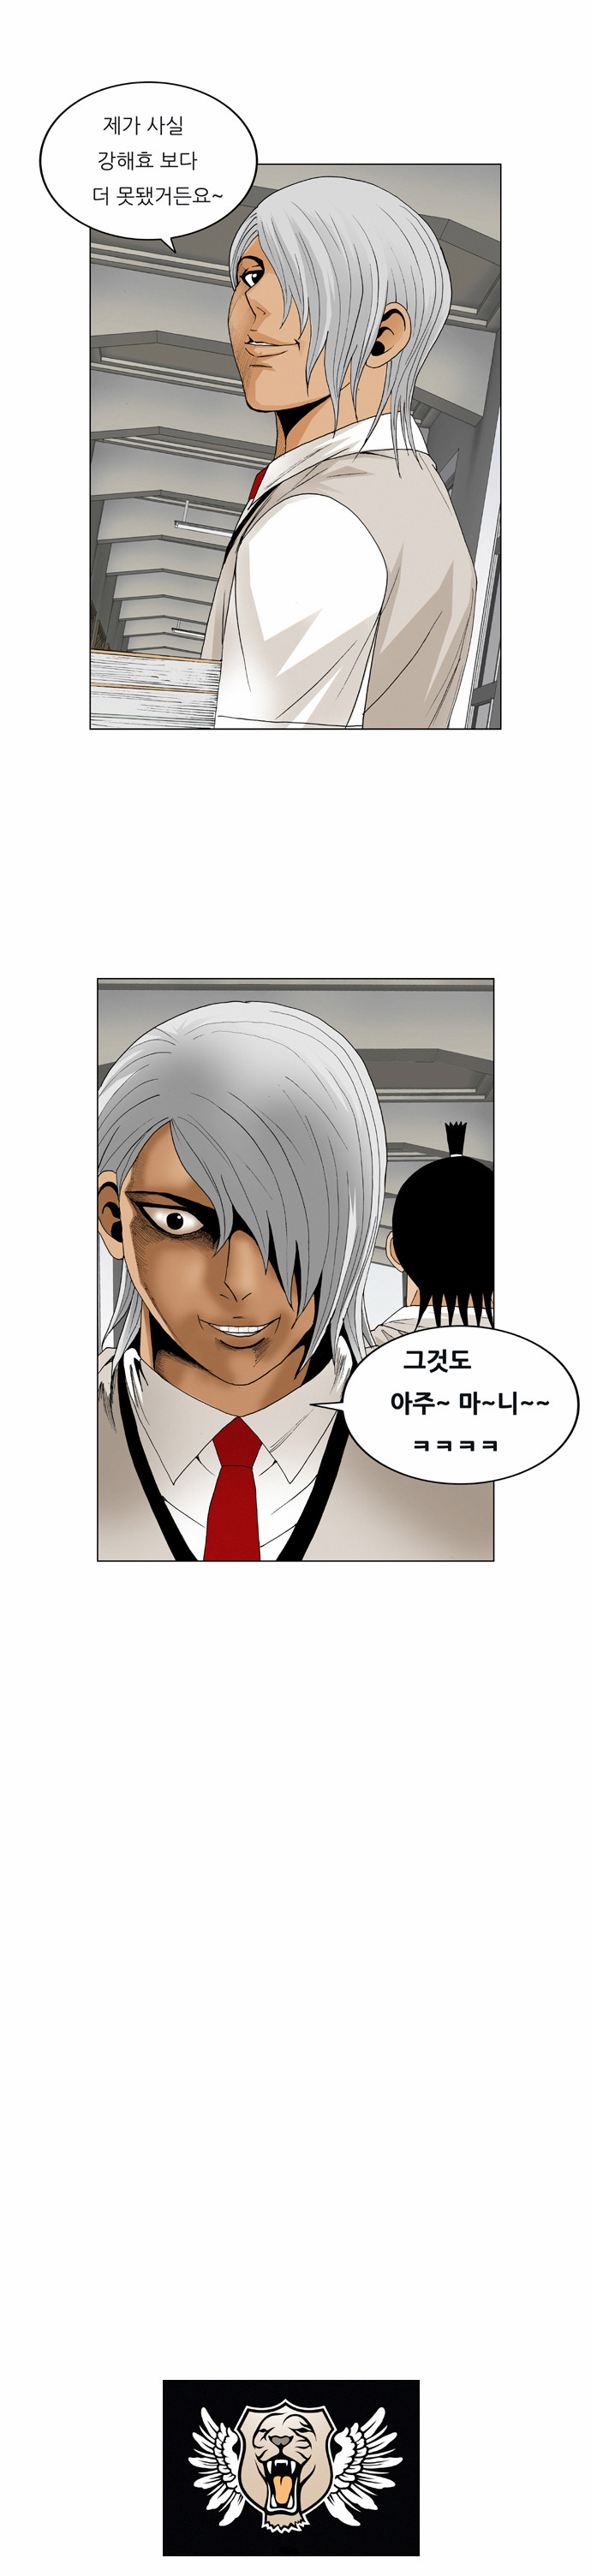 Ultimate Legend - Kang Hae Hyo - Chapter 41 - Page 31